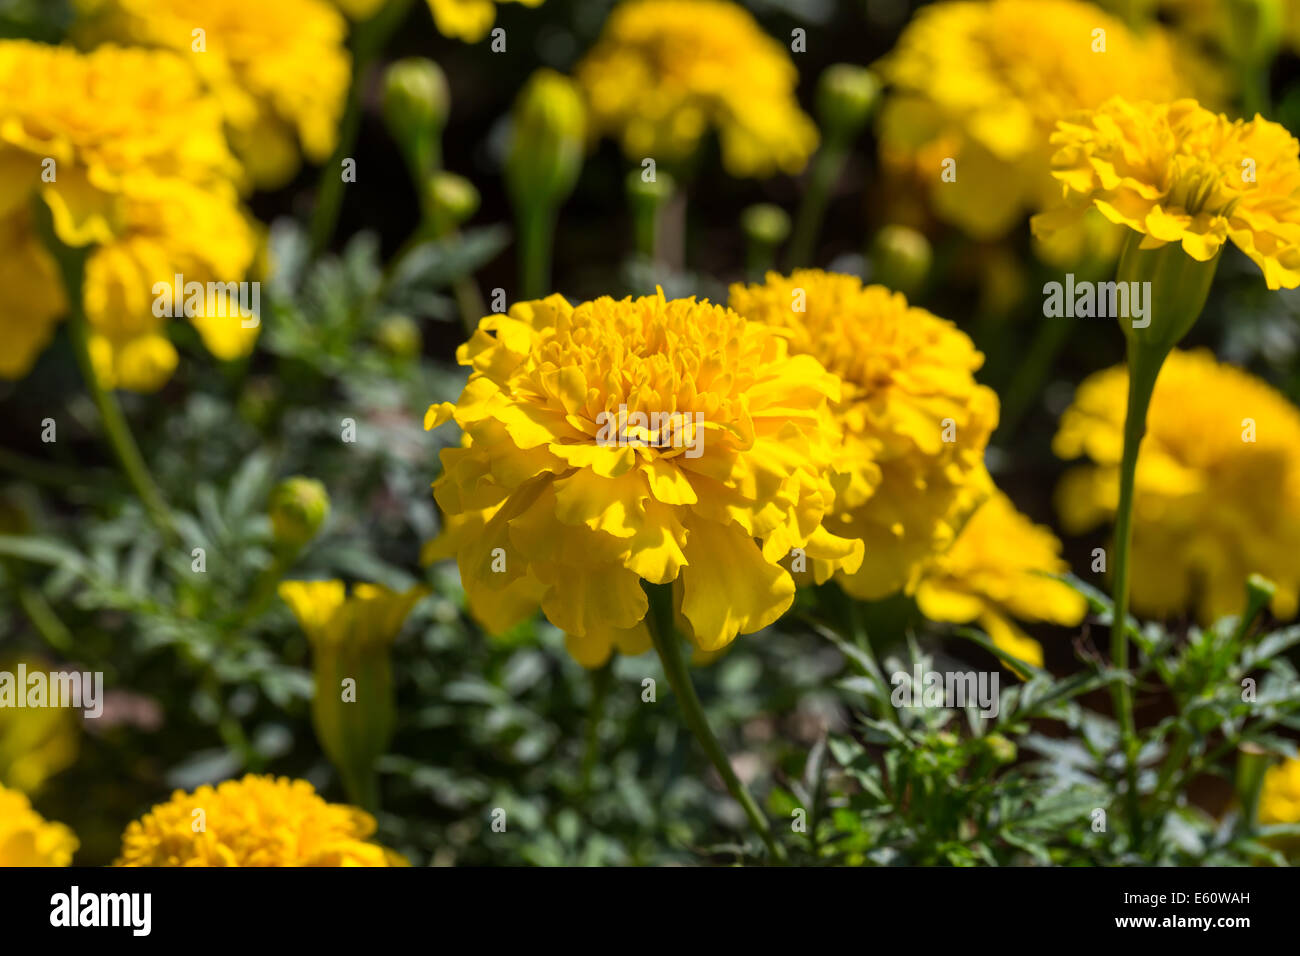 Yellow aster flowers in the garden as background. Marigold - Tagetes erecta L. Stock Photo